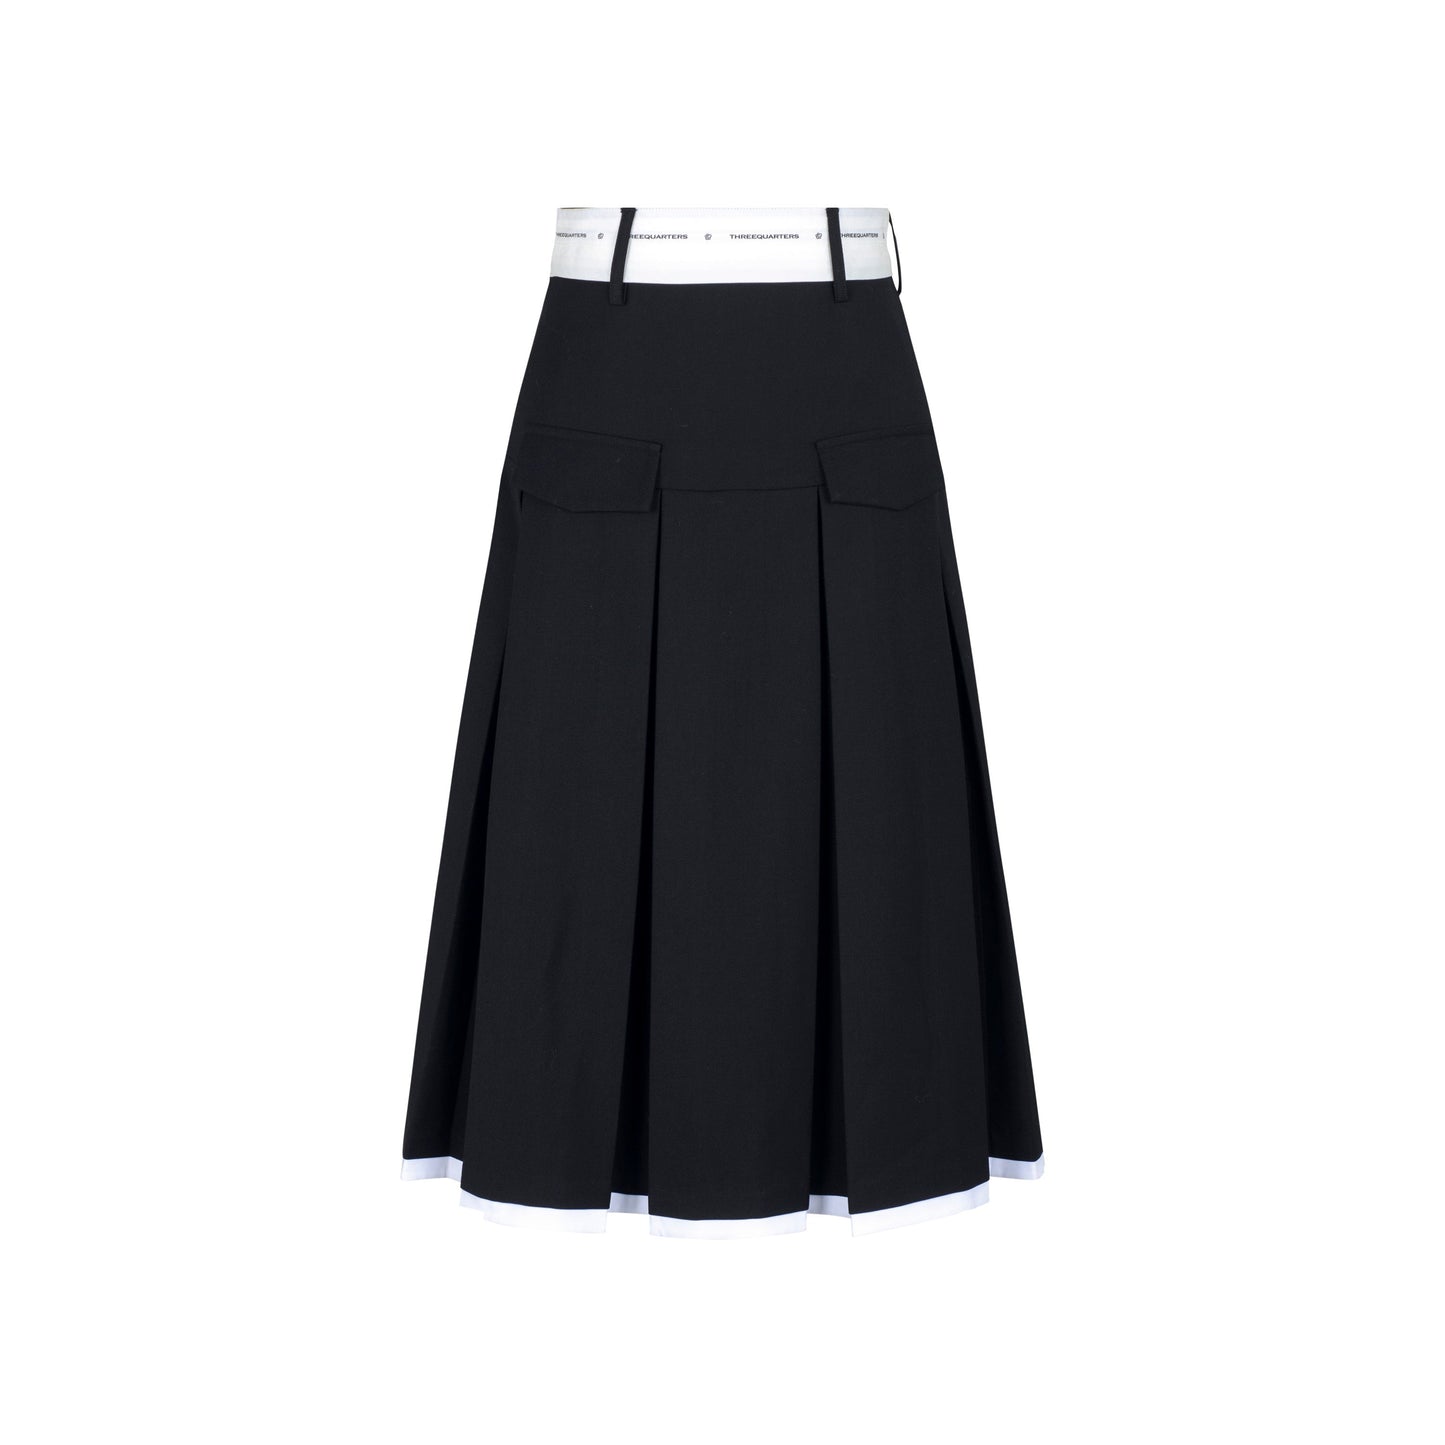 THREE QUARTERS Clashed Backless Top and LOGO Pleated Skirt Black